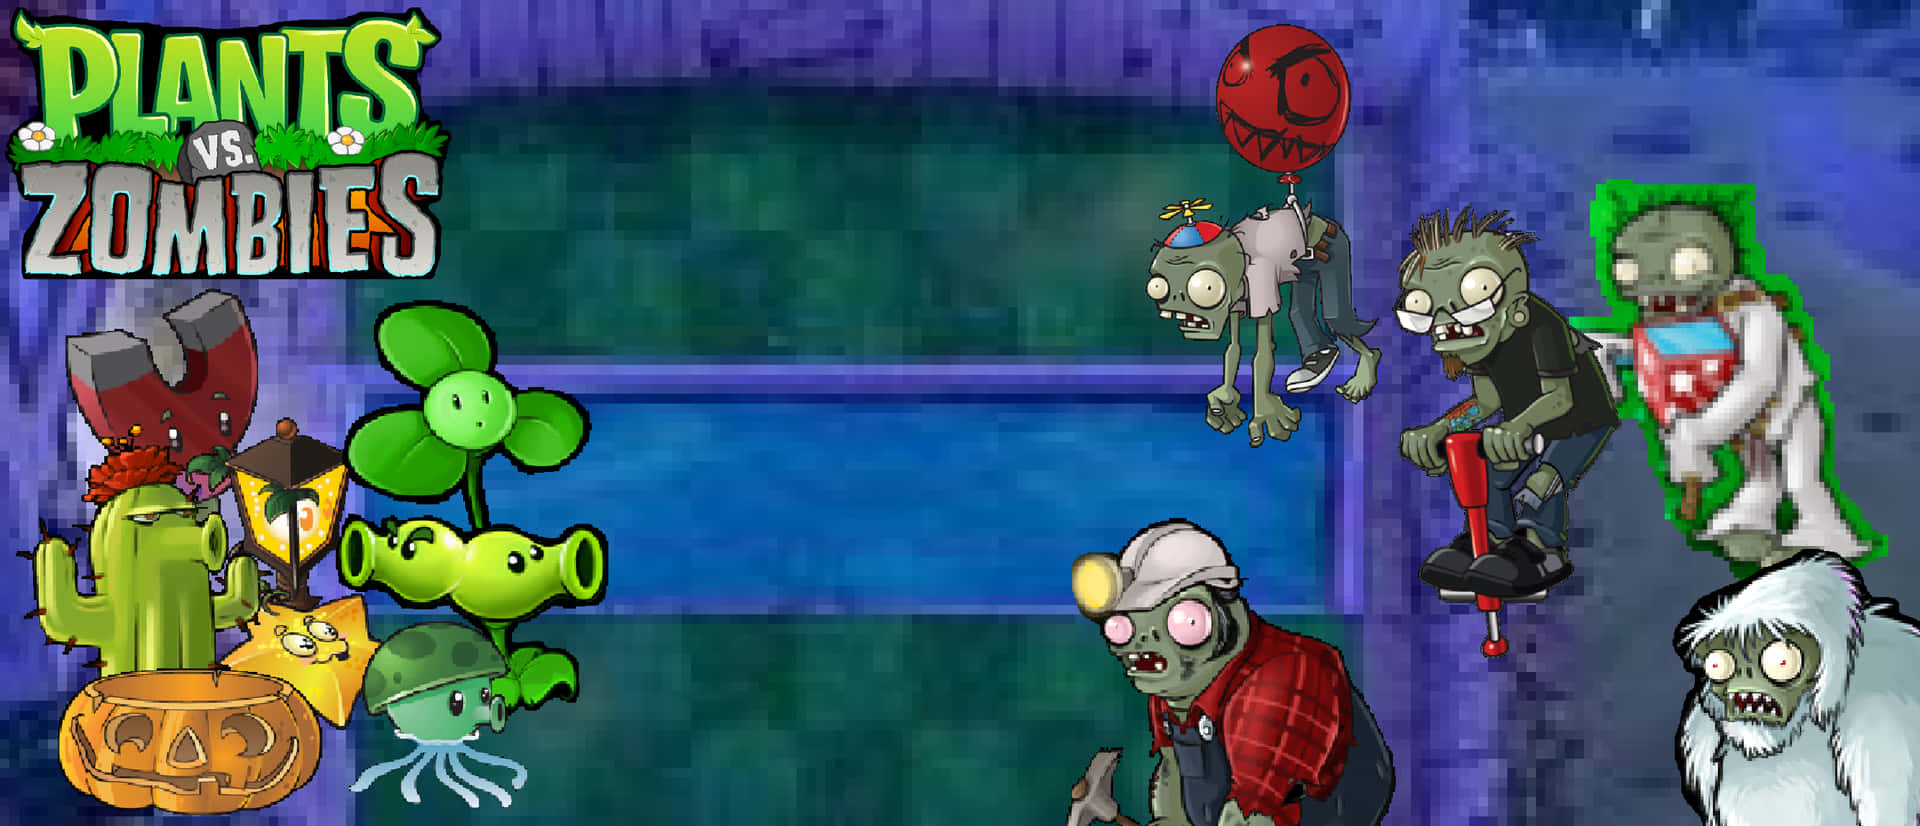 "Main characters from the video game Plants Vs Zombies" Wallpaper